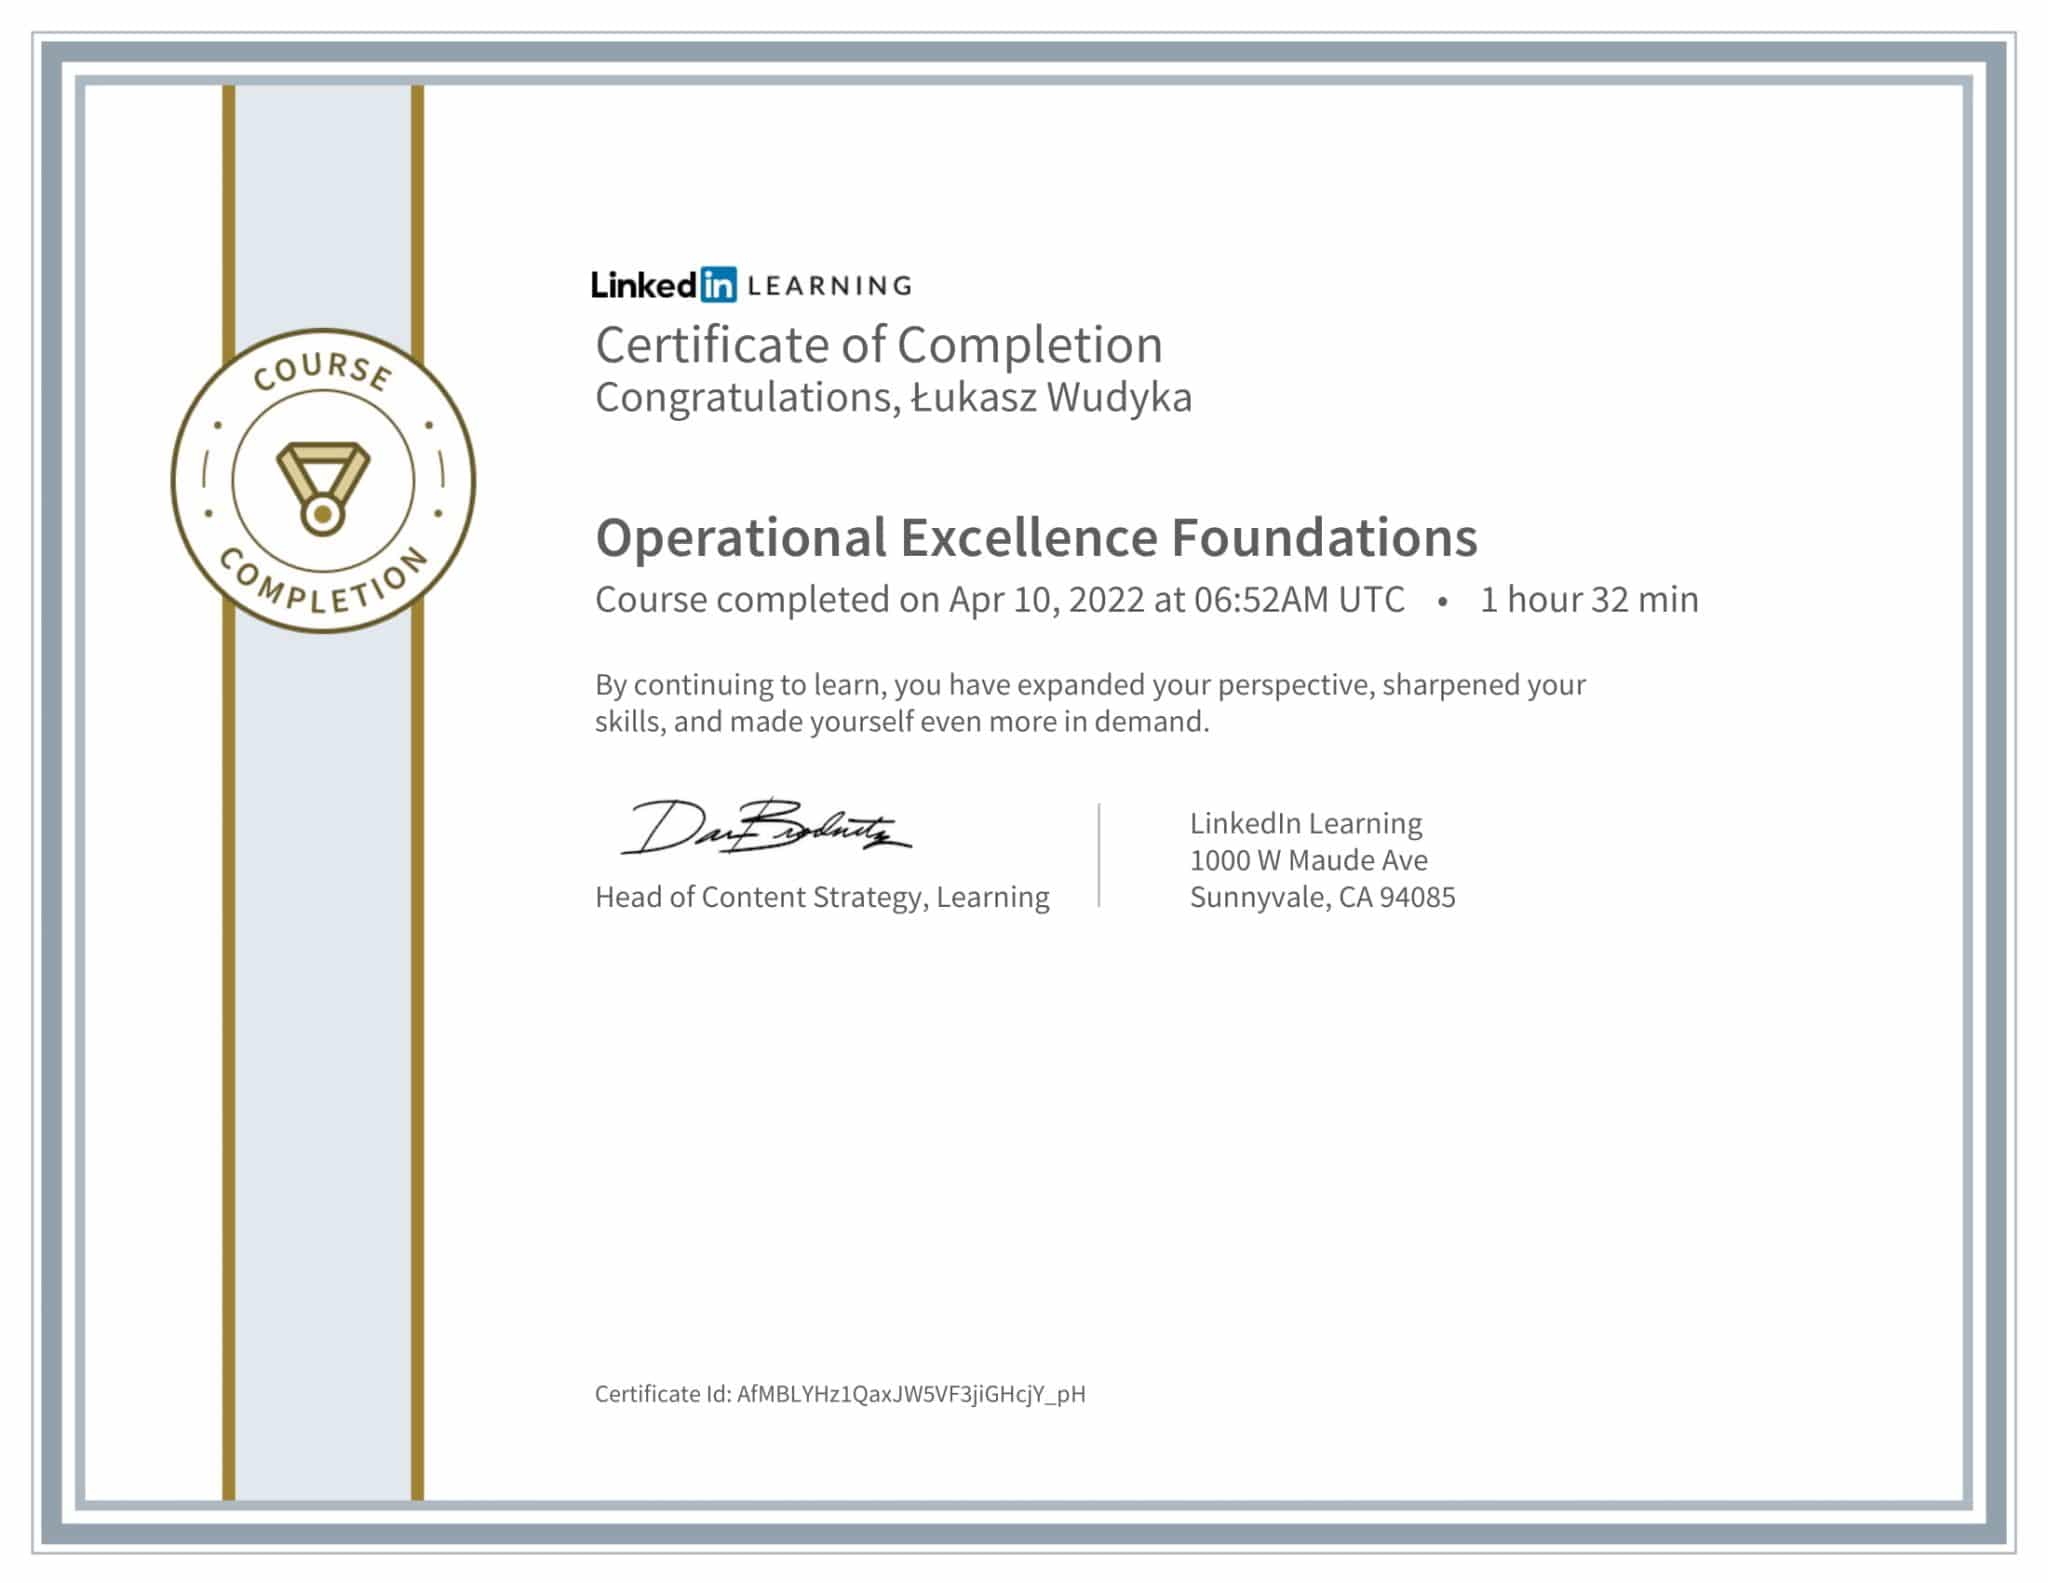 CertificateOfCompletion_Operational Excellence Foundations (1)-1